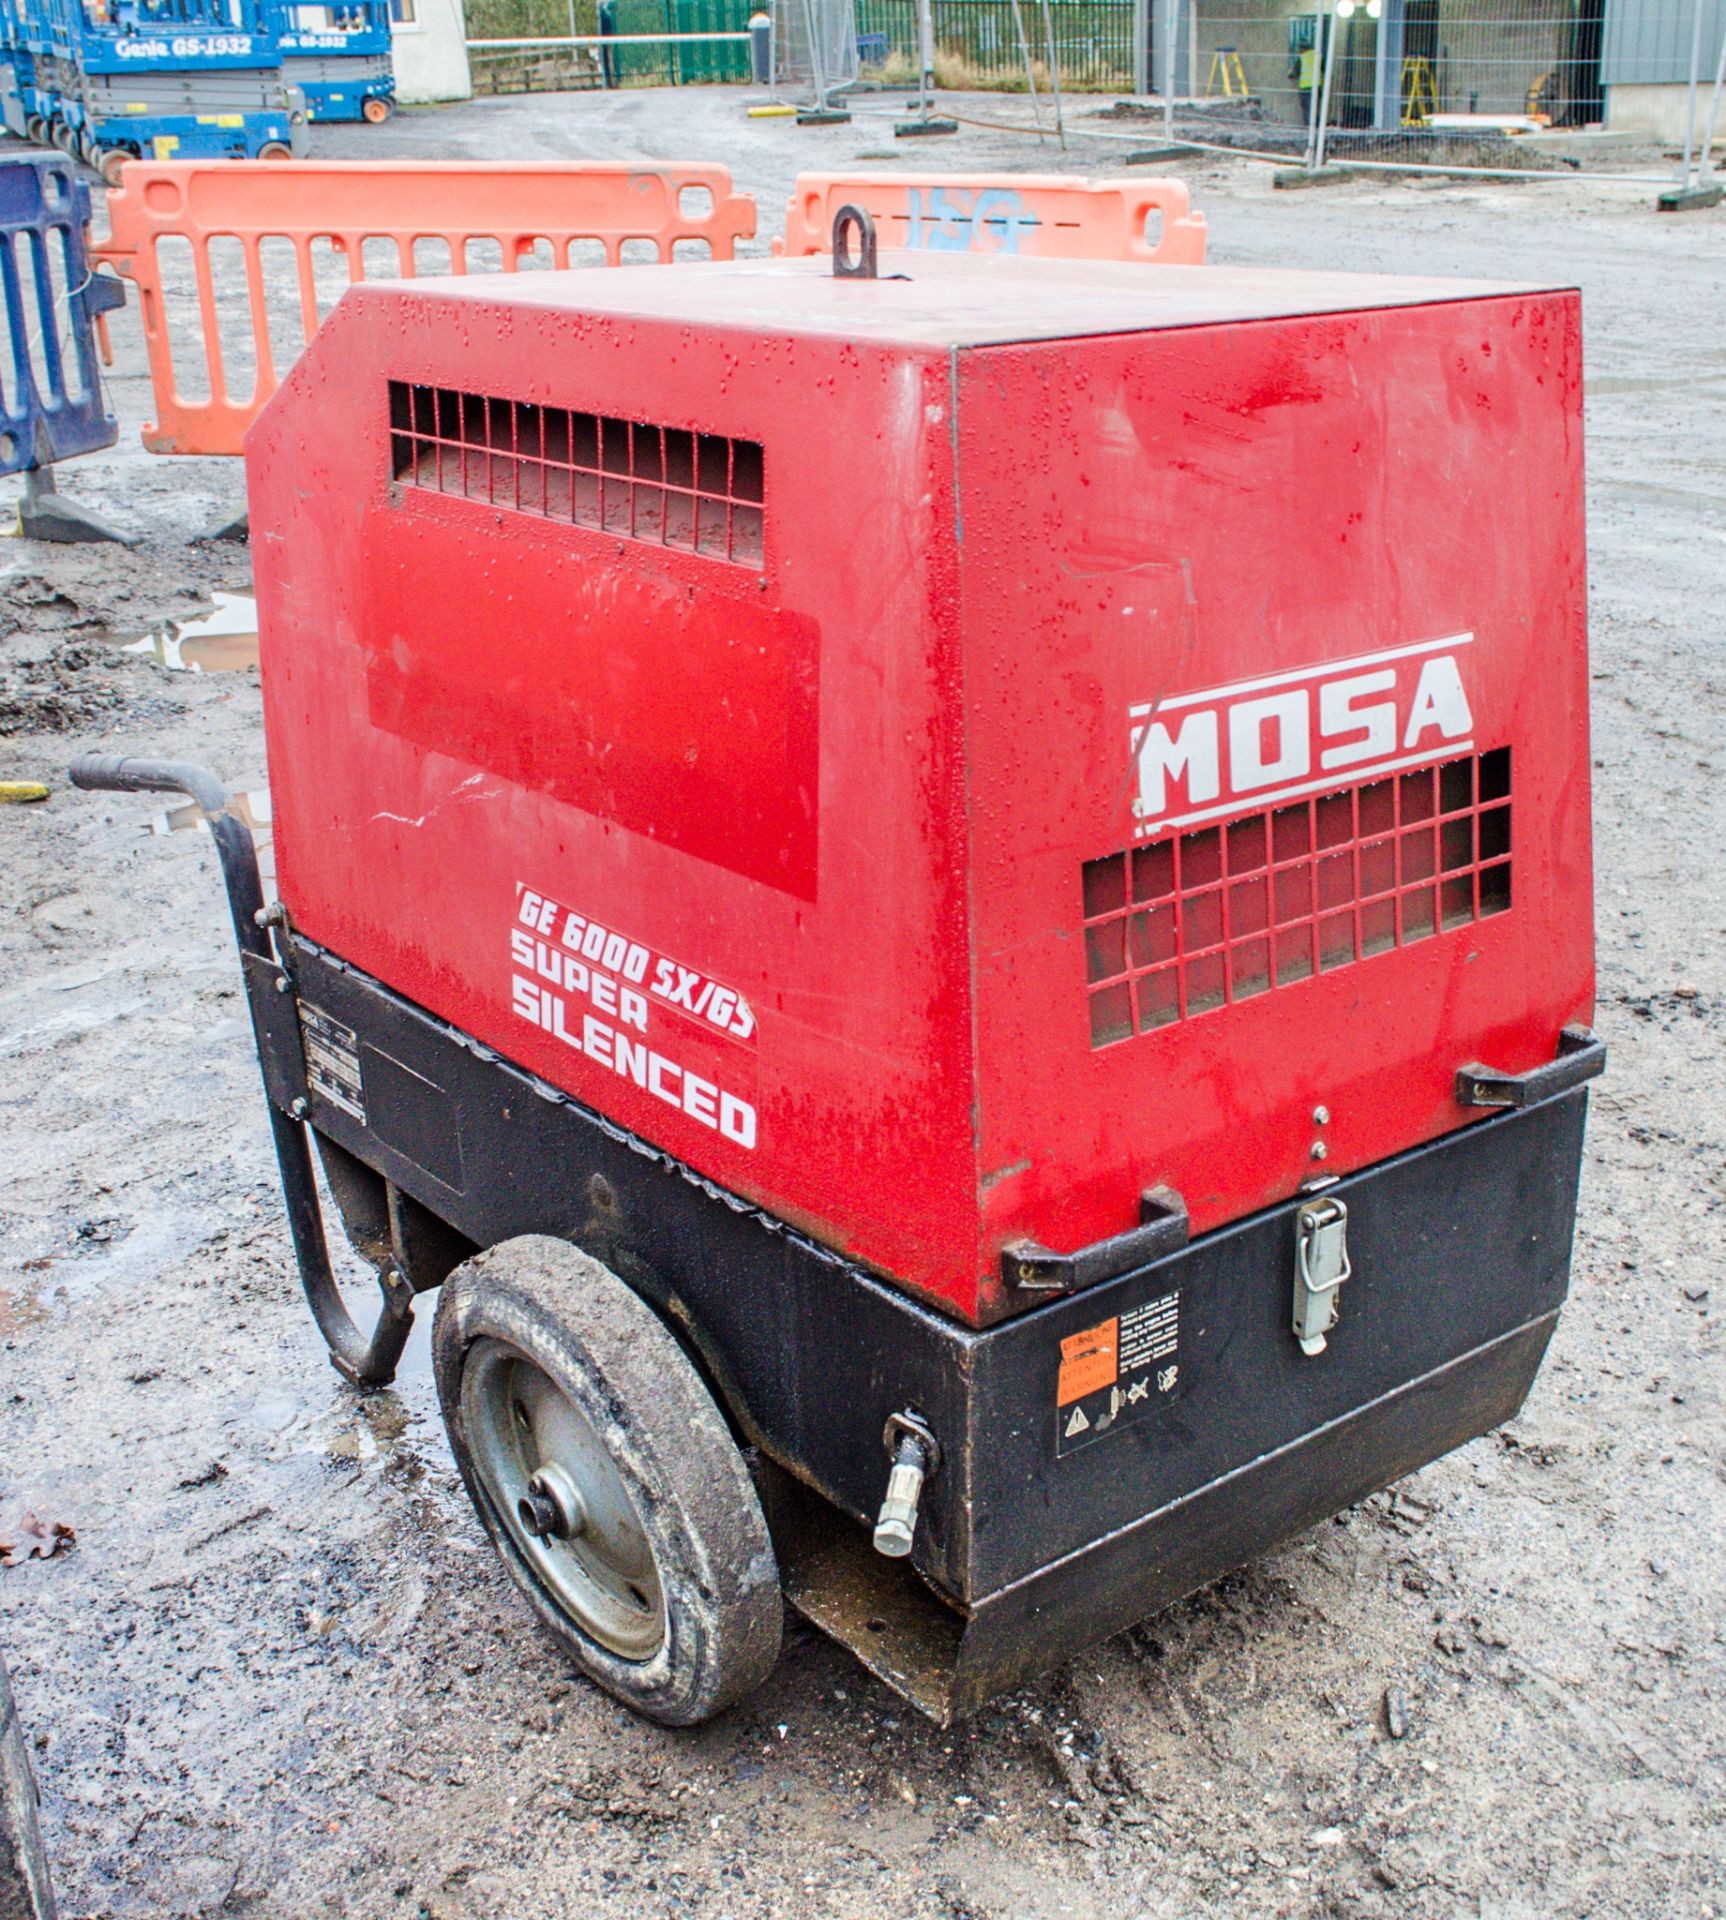 Mosa GE6000 SX/GS 6 kva diesel driven generator Year: 2015 S/N: 42780 Recorded Hours: 2471 1510- - Image 2 of 4